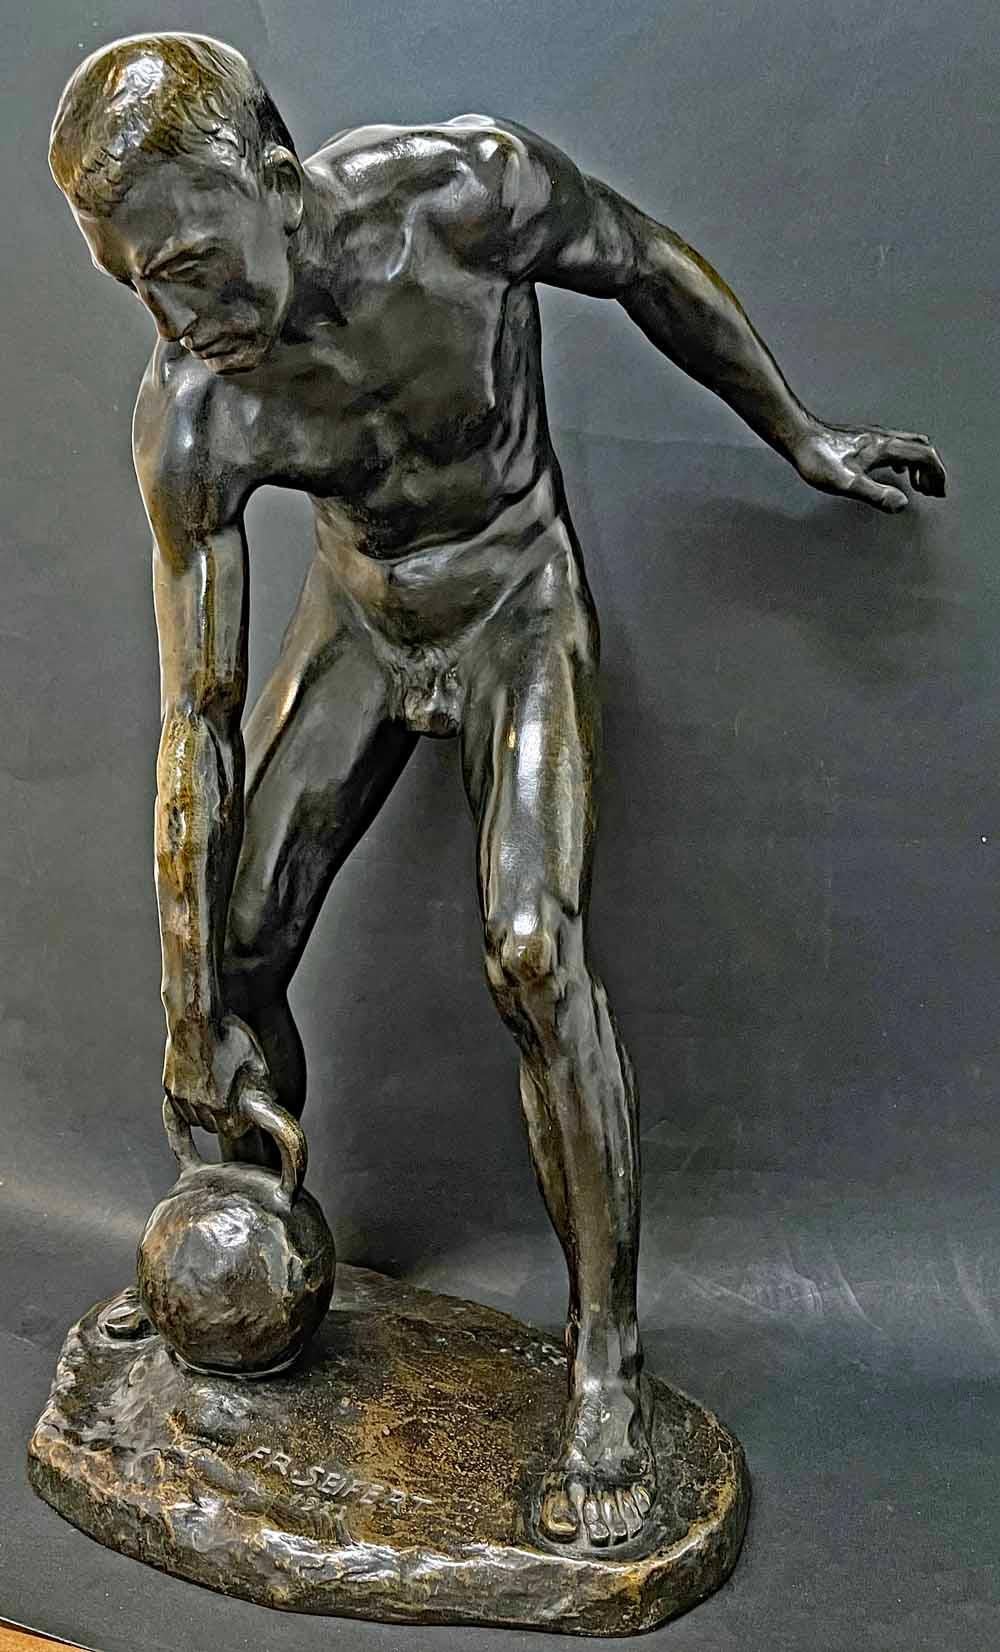 This highly rare bronze of a nude male athlete preparing to left a heavy kettlebell weight was sculpted by an Austrian artist, Franz Seifert, in 1922.  Although Seifert is known for his nude figures straining to accomplish physical tasks -- such as